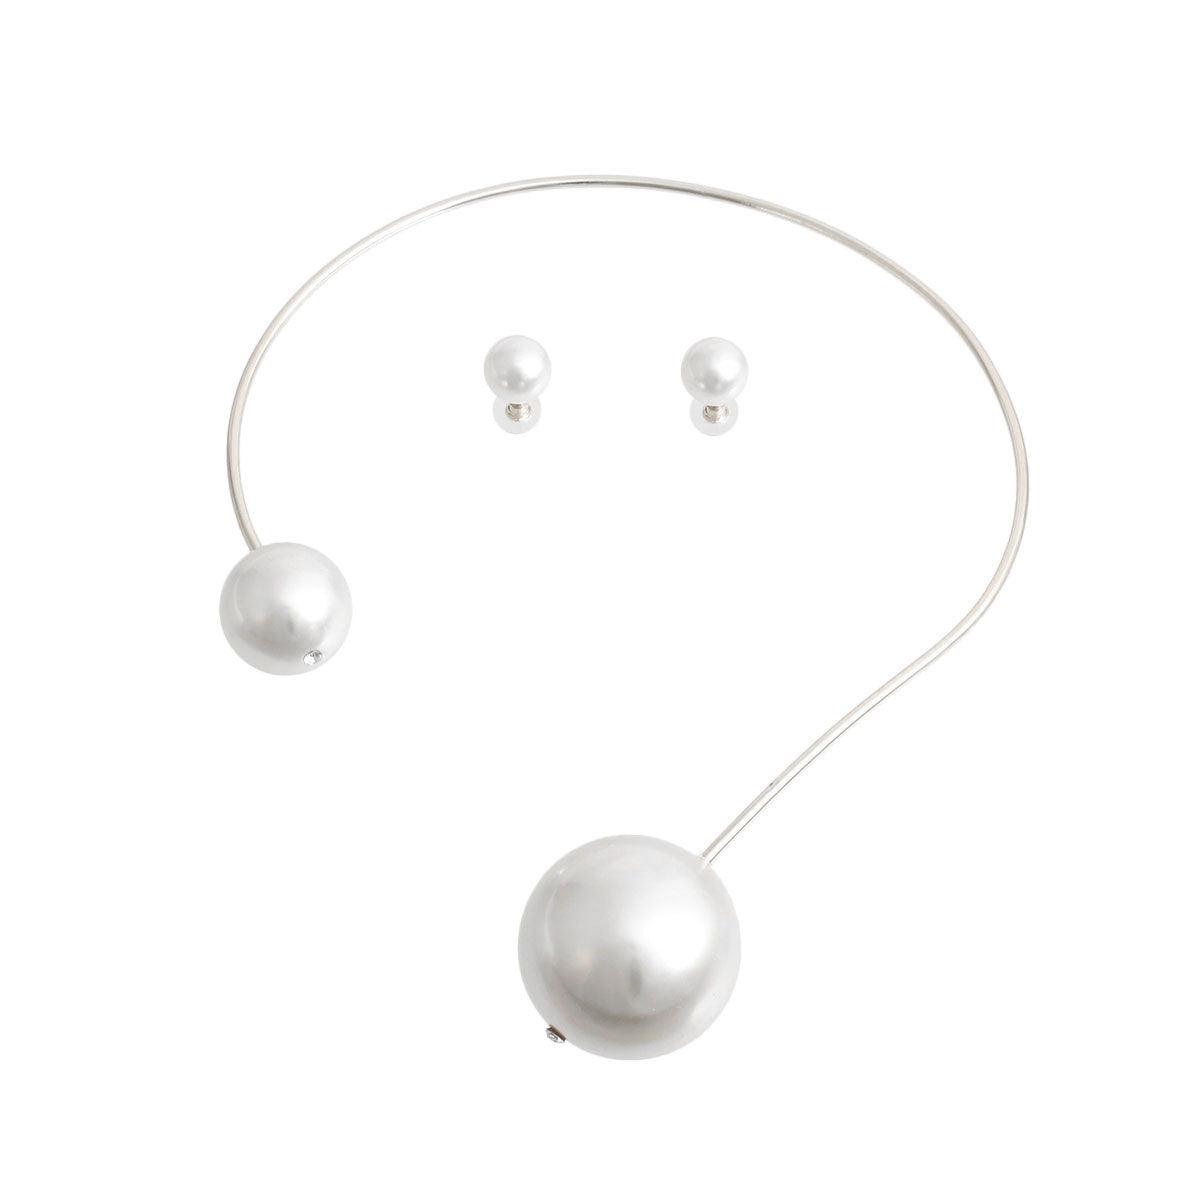 Exquisite White Pearl Bauble Silver Choker Necklace Set | Fashion Jewelry